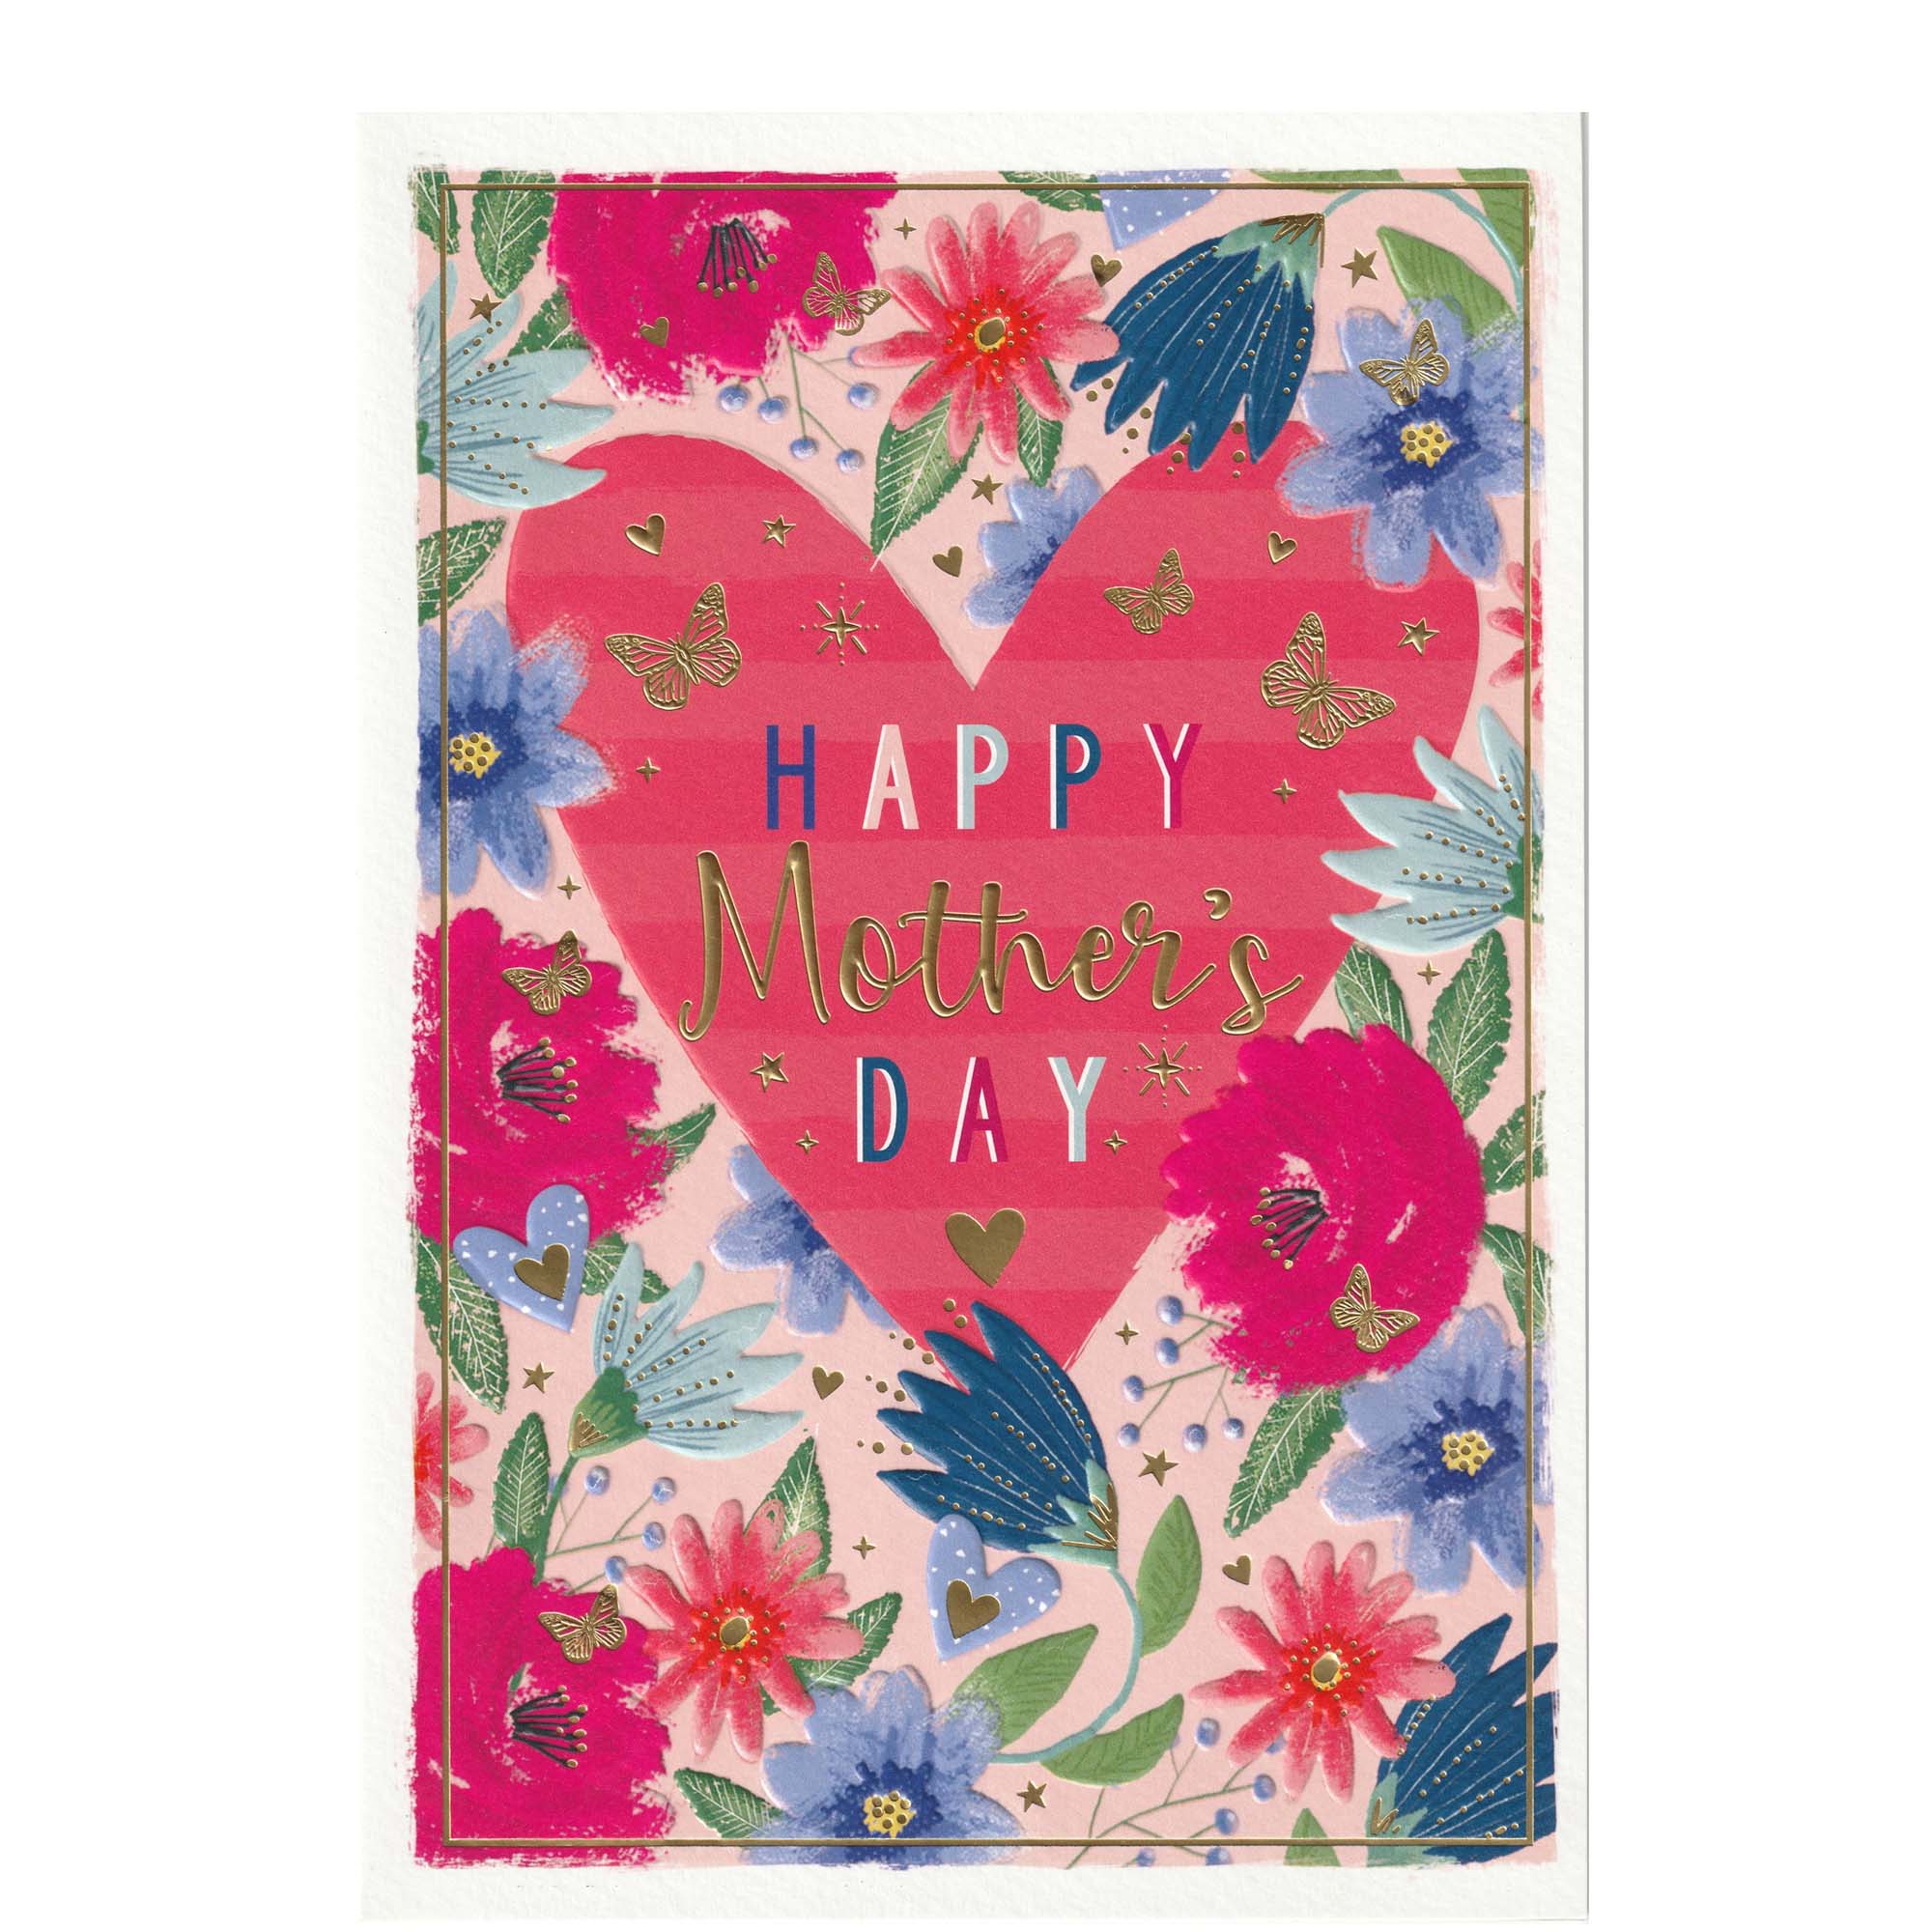 Happy Mothers Day Love Greeting Card